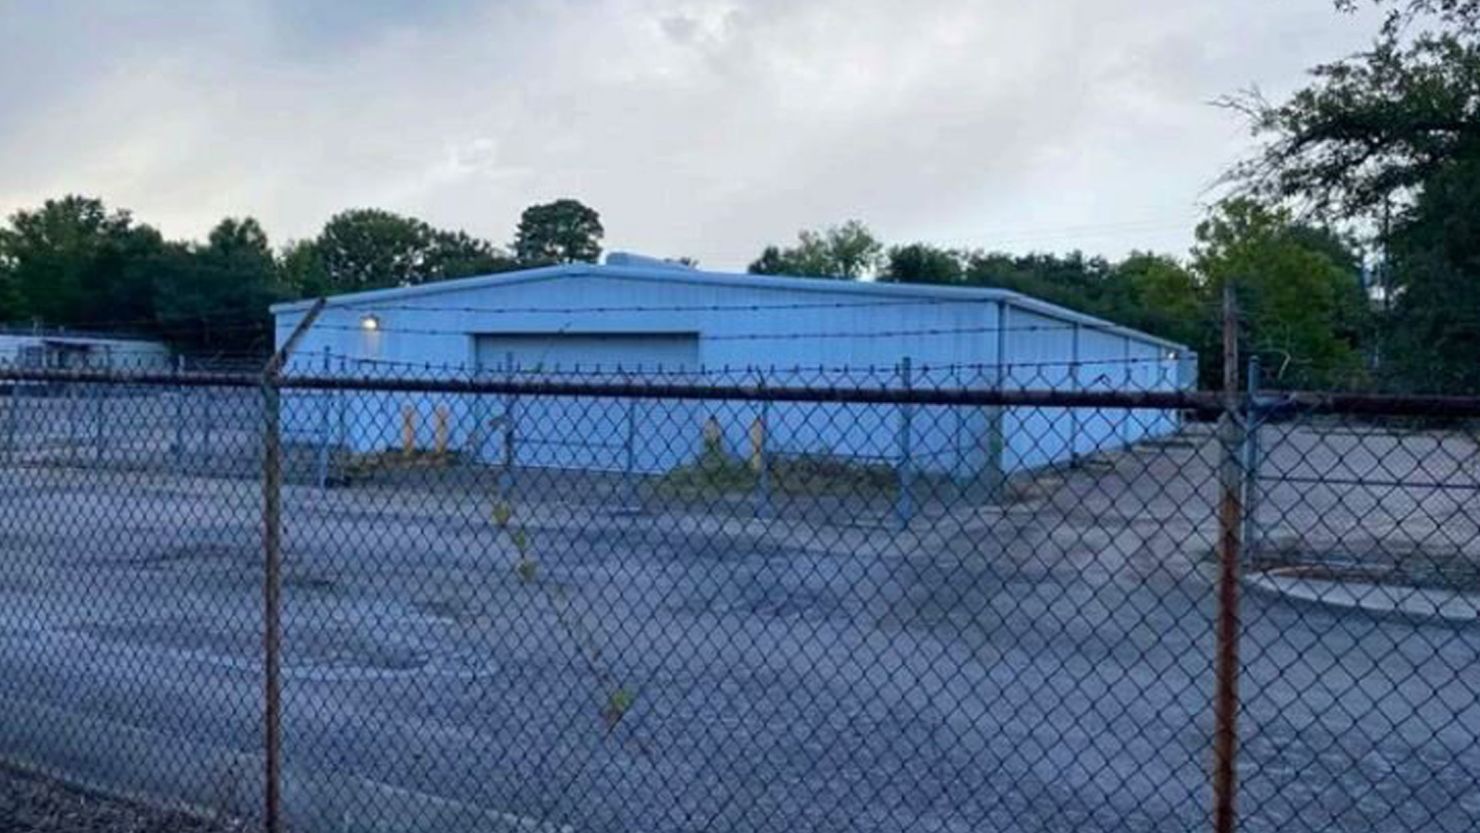 This warehouse, officially known as the Narcotics Processing Facility, "has been permanently closed and the Street Crimes Unit Officers have been disbanded and reassigned," the Baton Rouge Police Department has said.